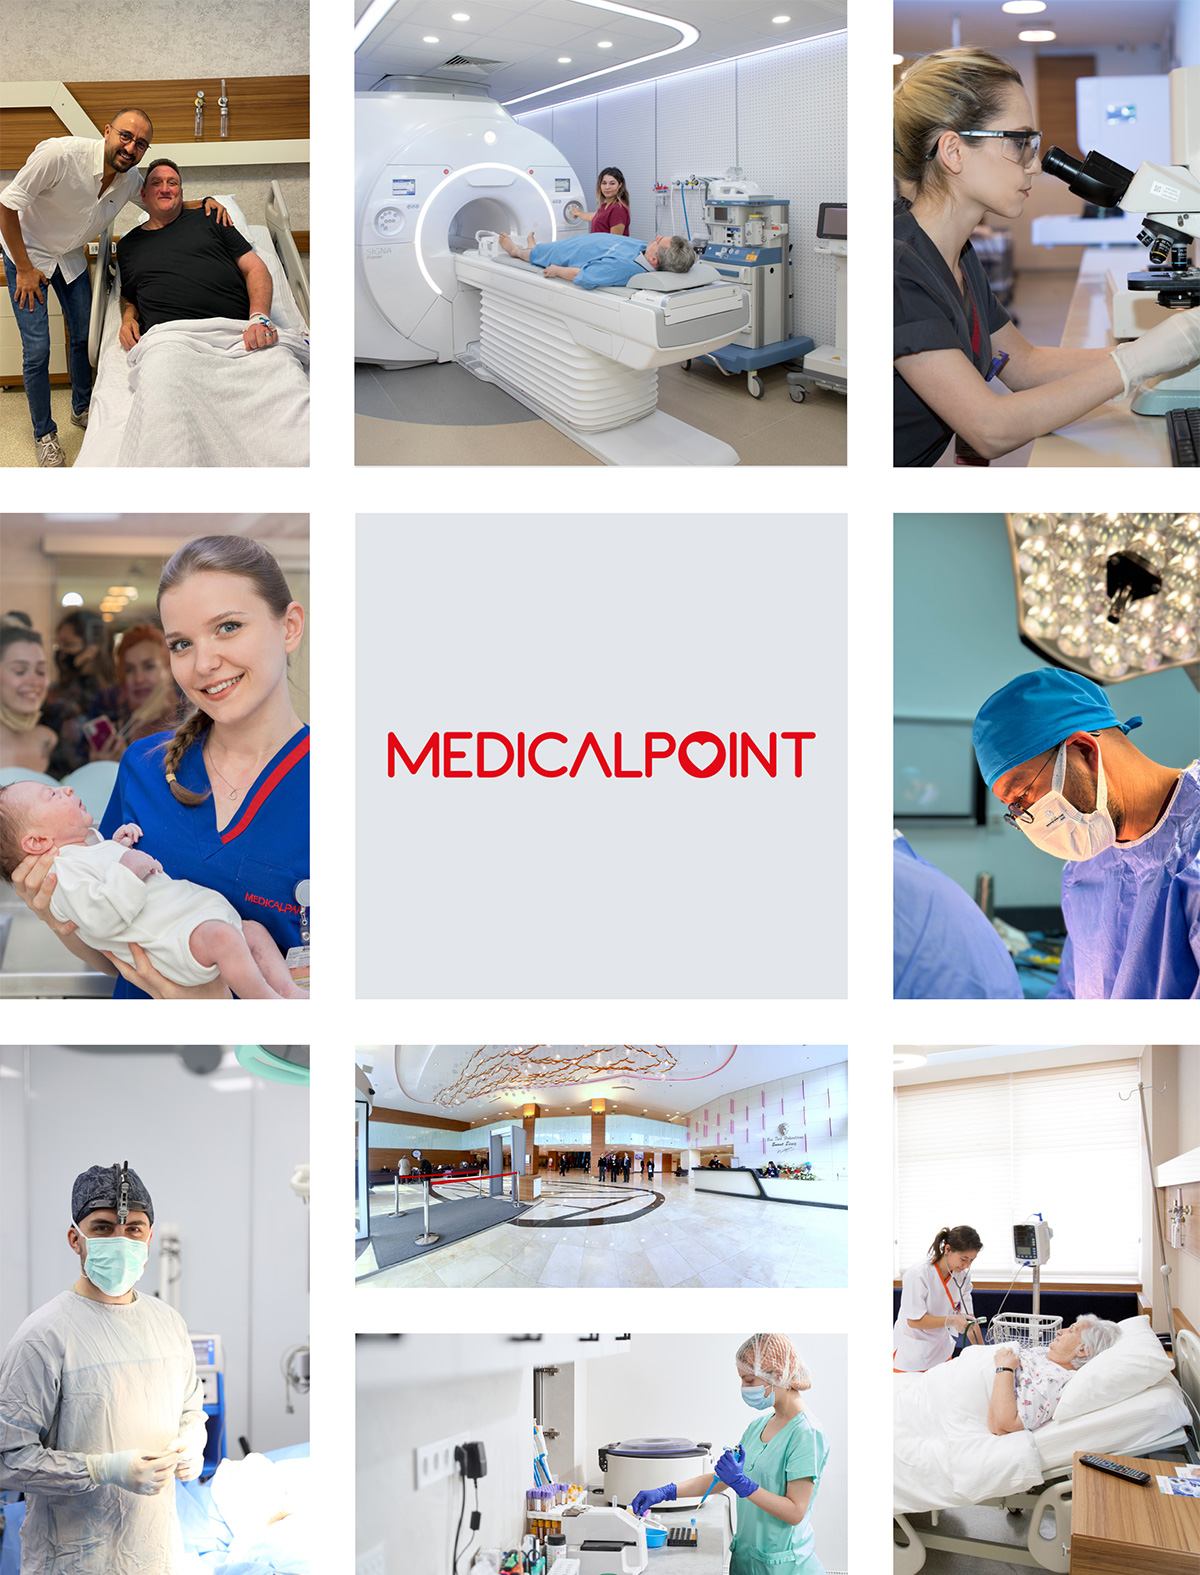 Medical point